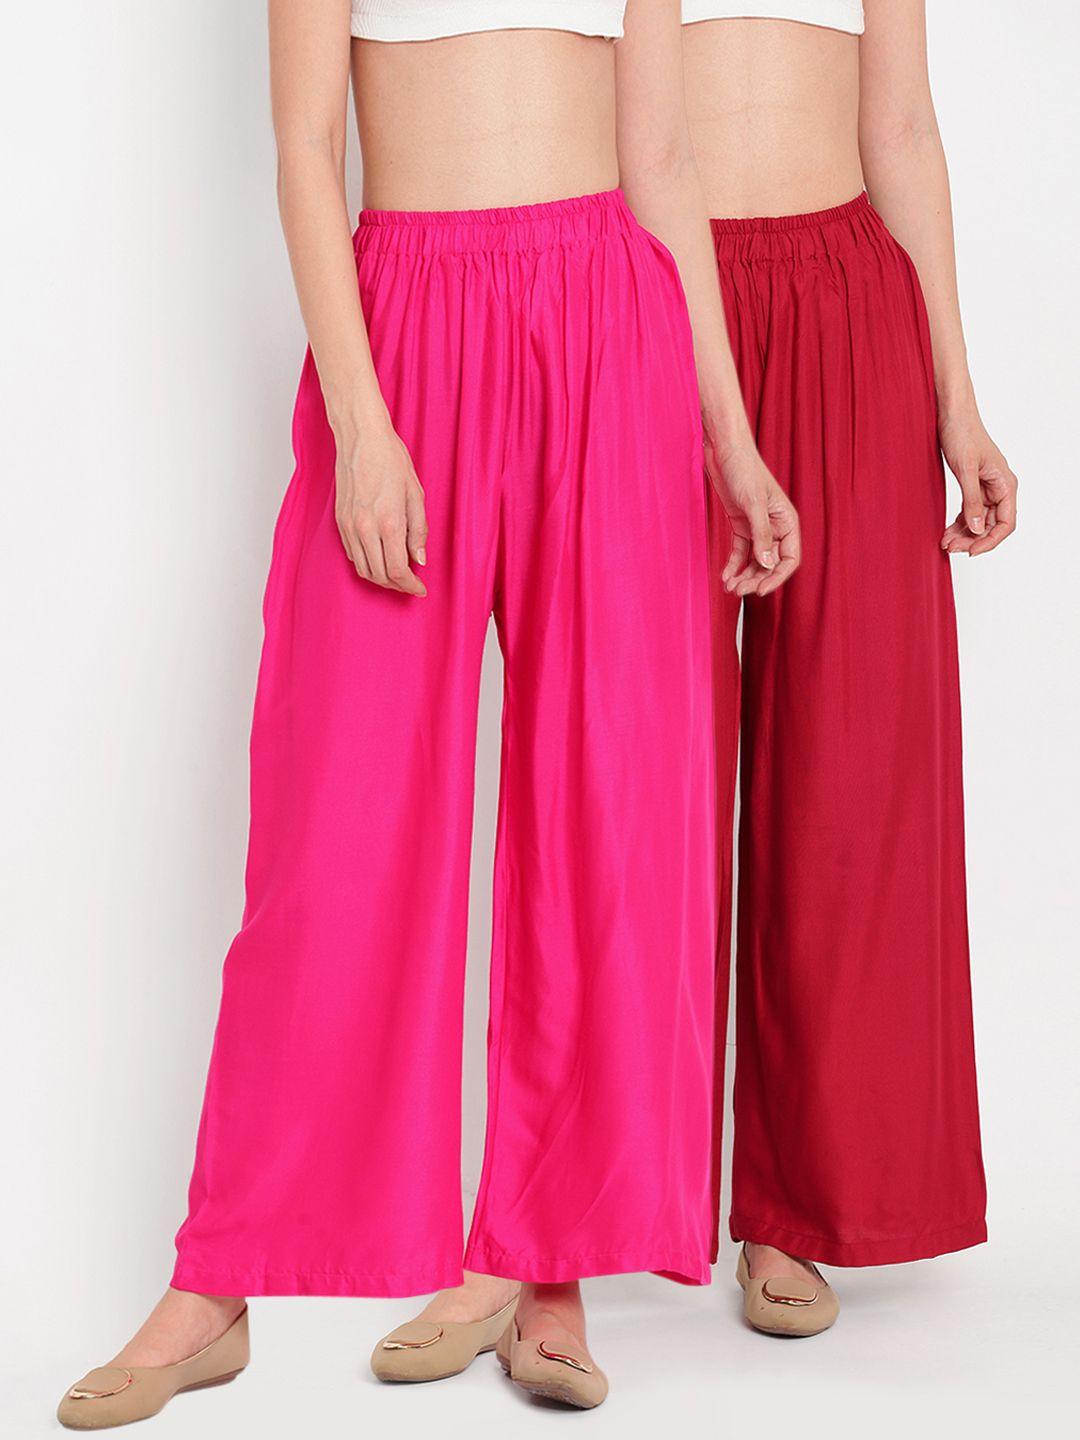 tag 7 women set of 2 pink & maroon solid flared palazzos